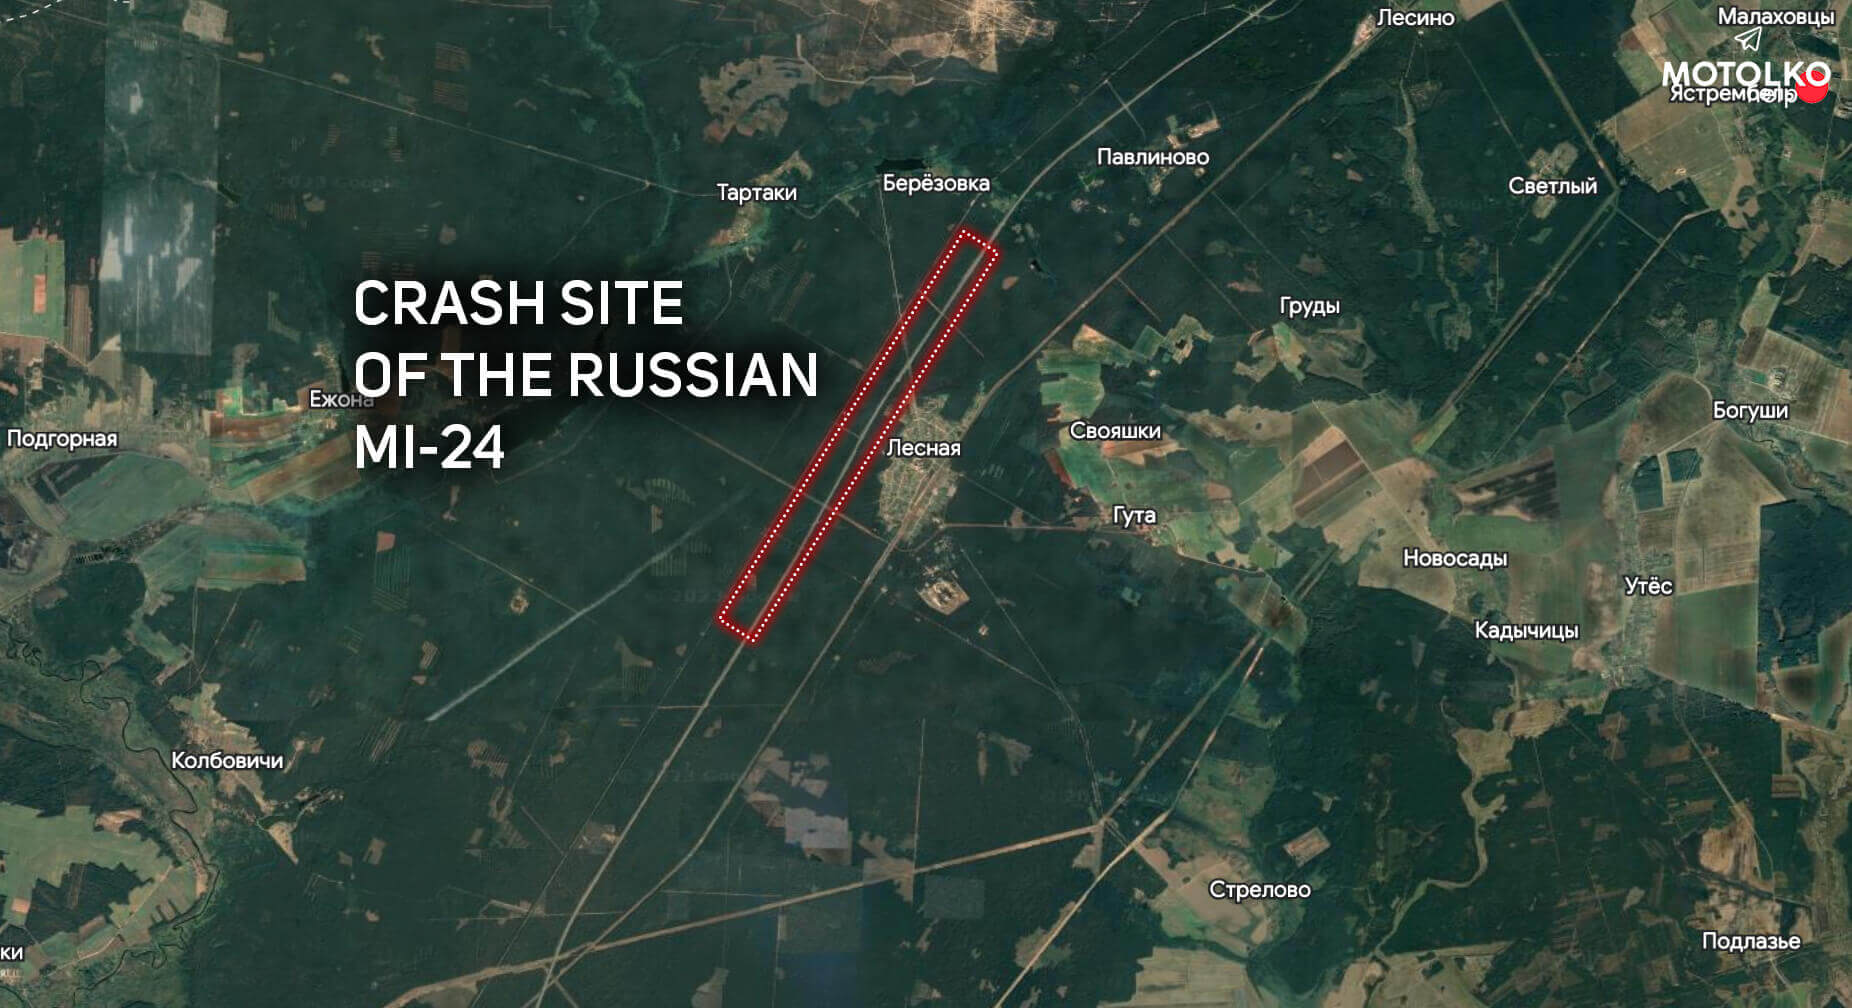 Crash site of the Mi-24 helicopter of the Russian Aerospace Forces